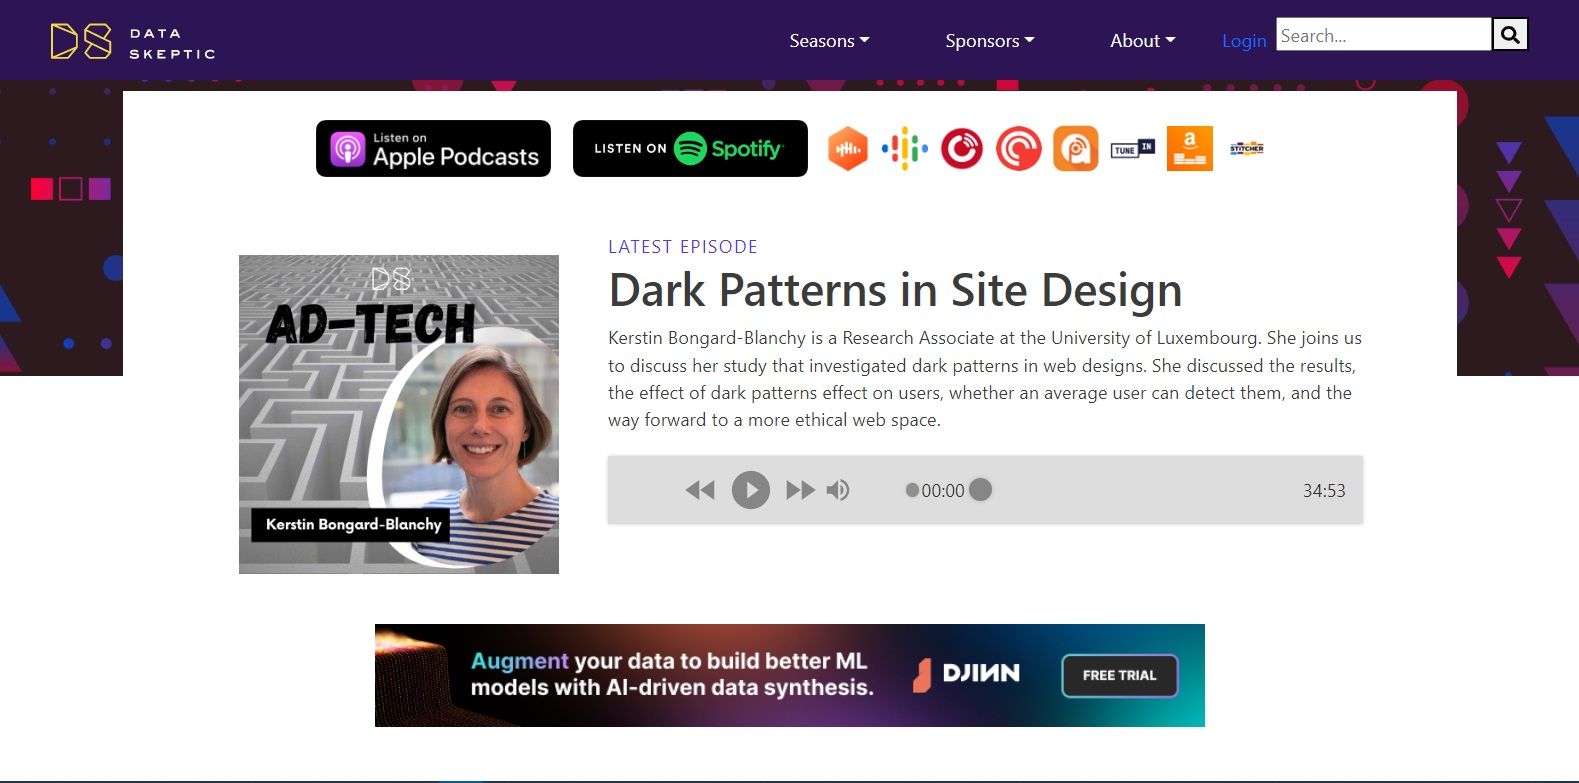 A screenshot of the Data Skeptic podcast overview